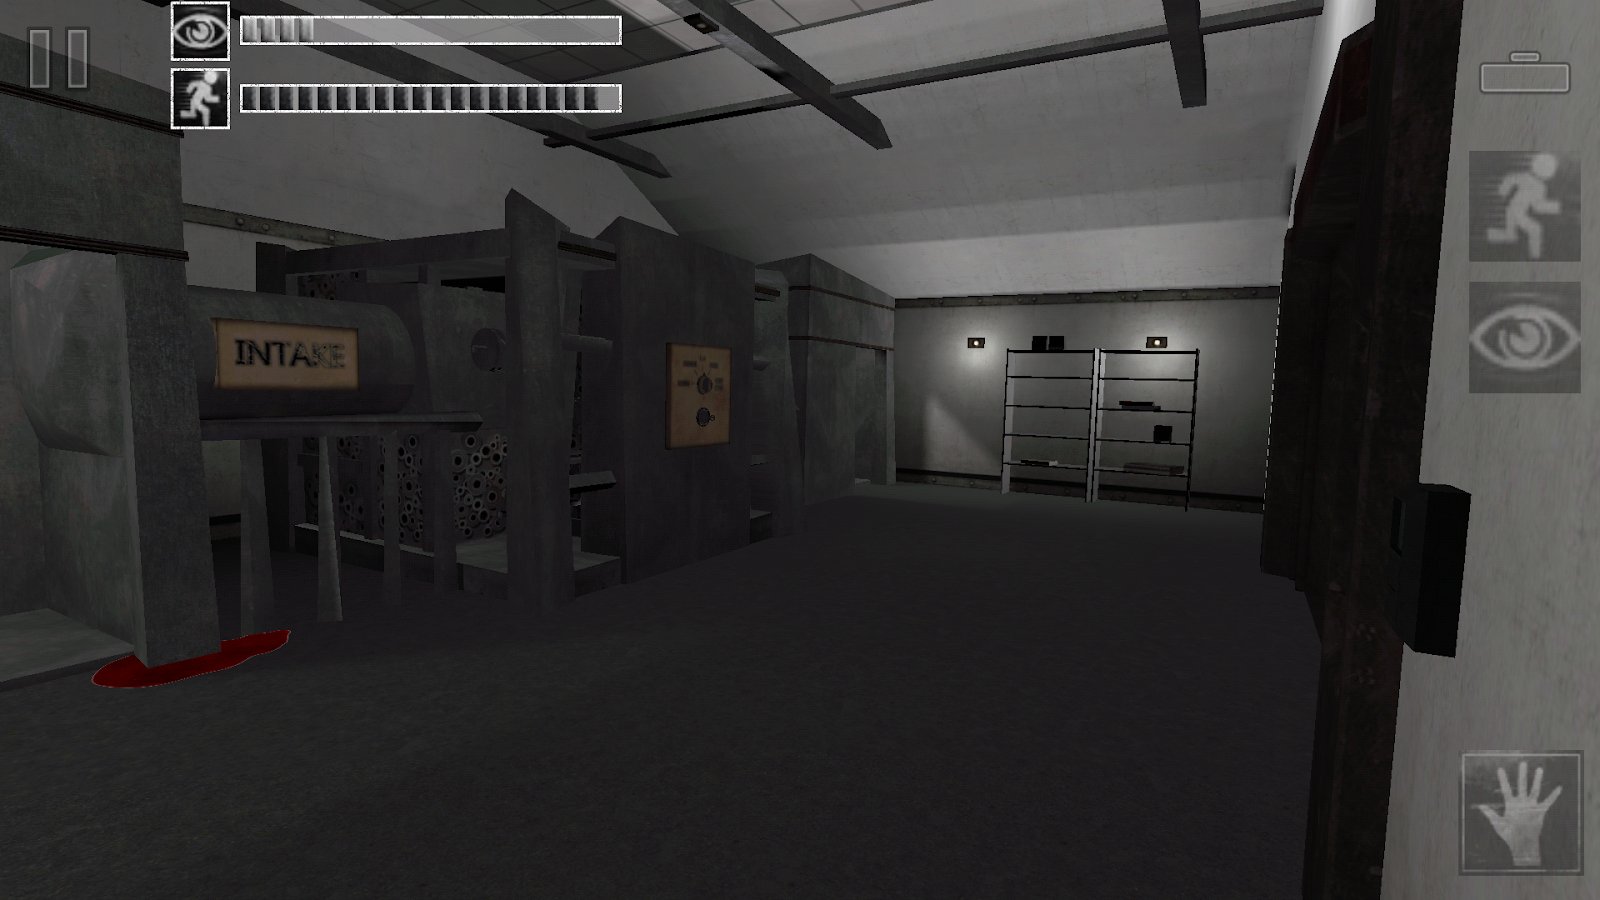 download free scp containment